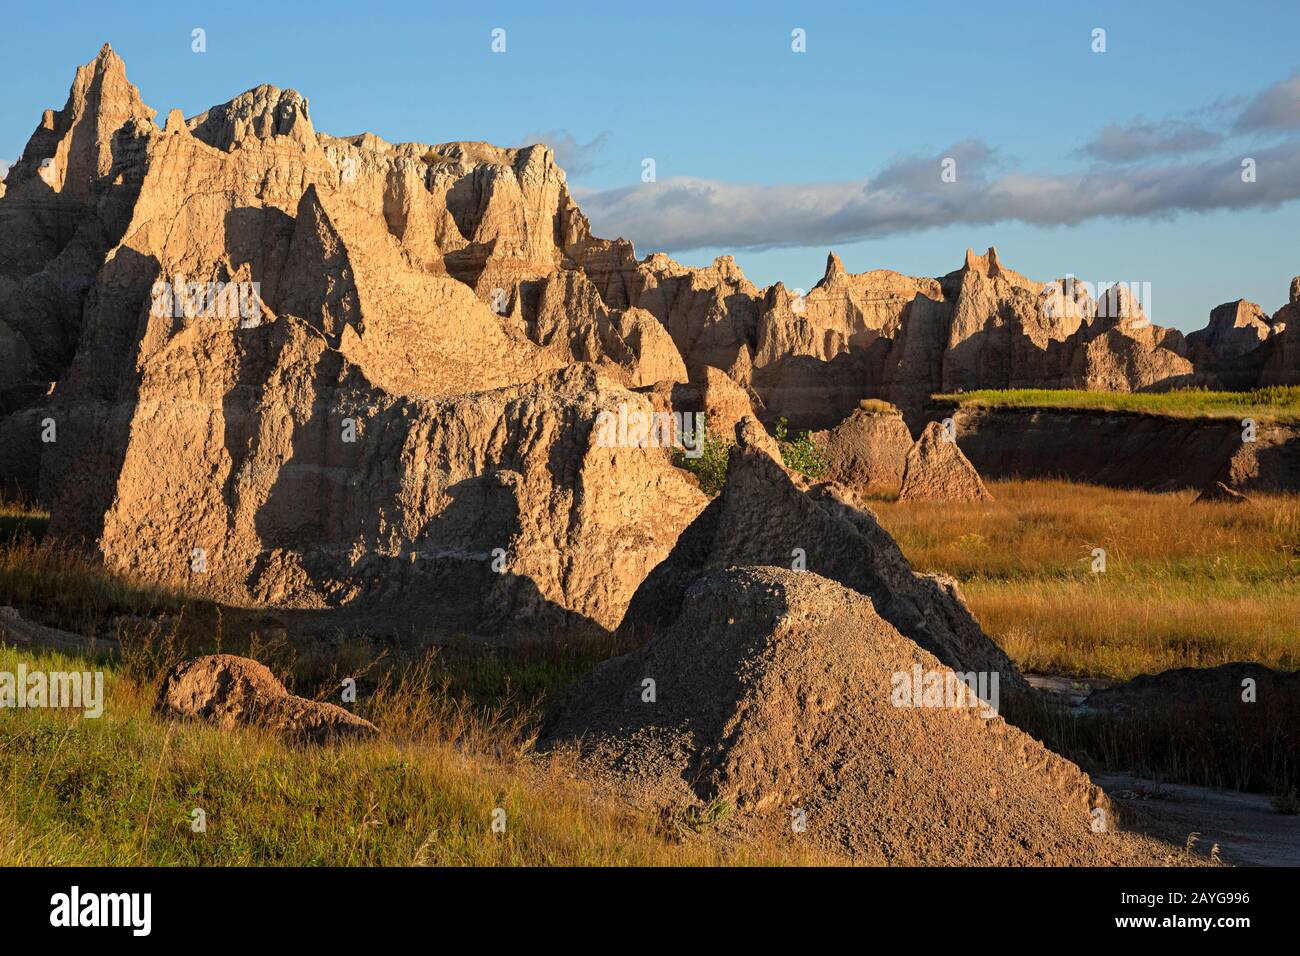 SD00110-00...SOUTH DAKOTA - Layered and eroded buttes at Badlands National Park. Stock Photo